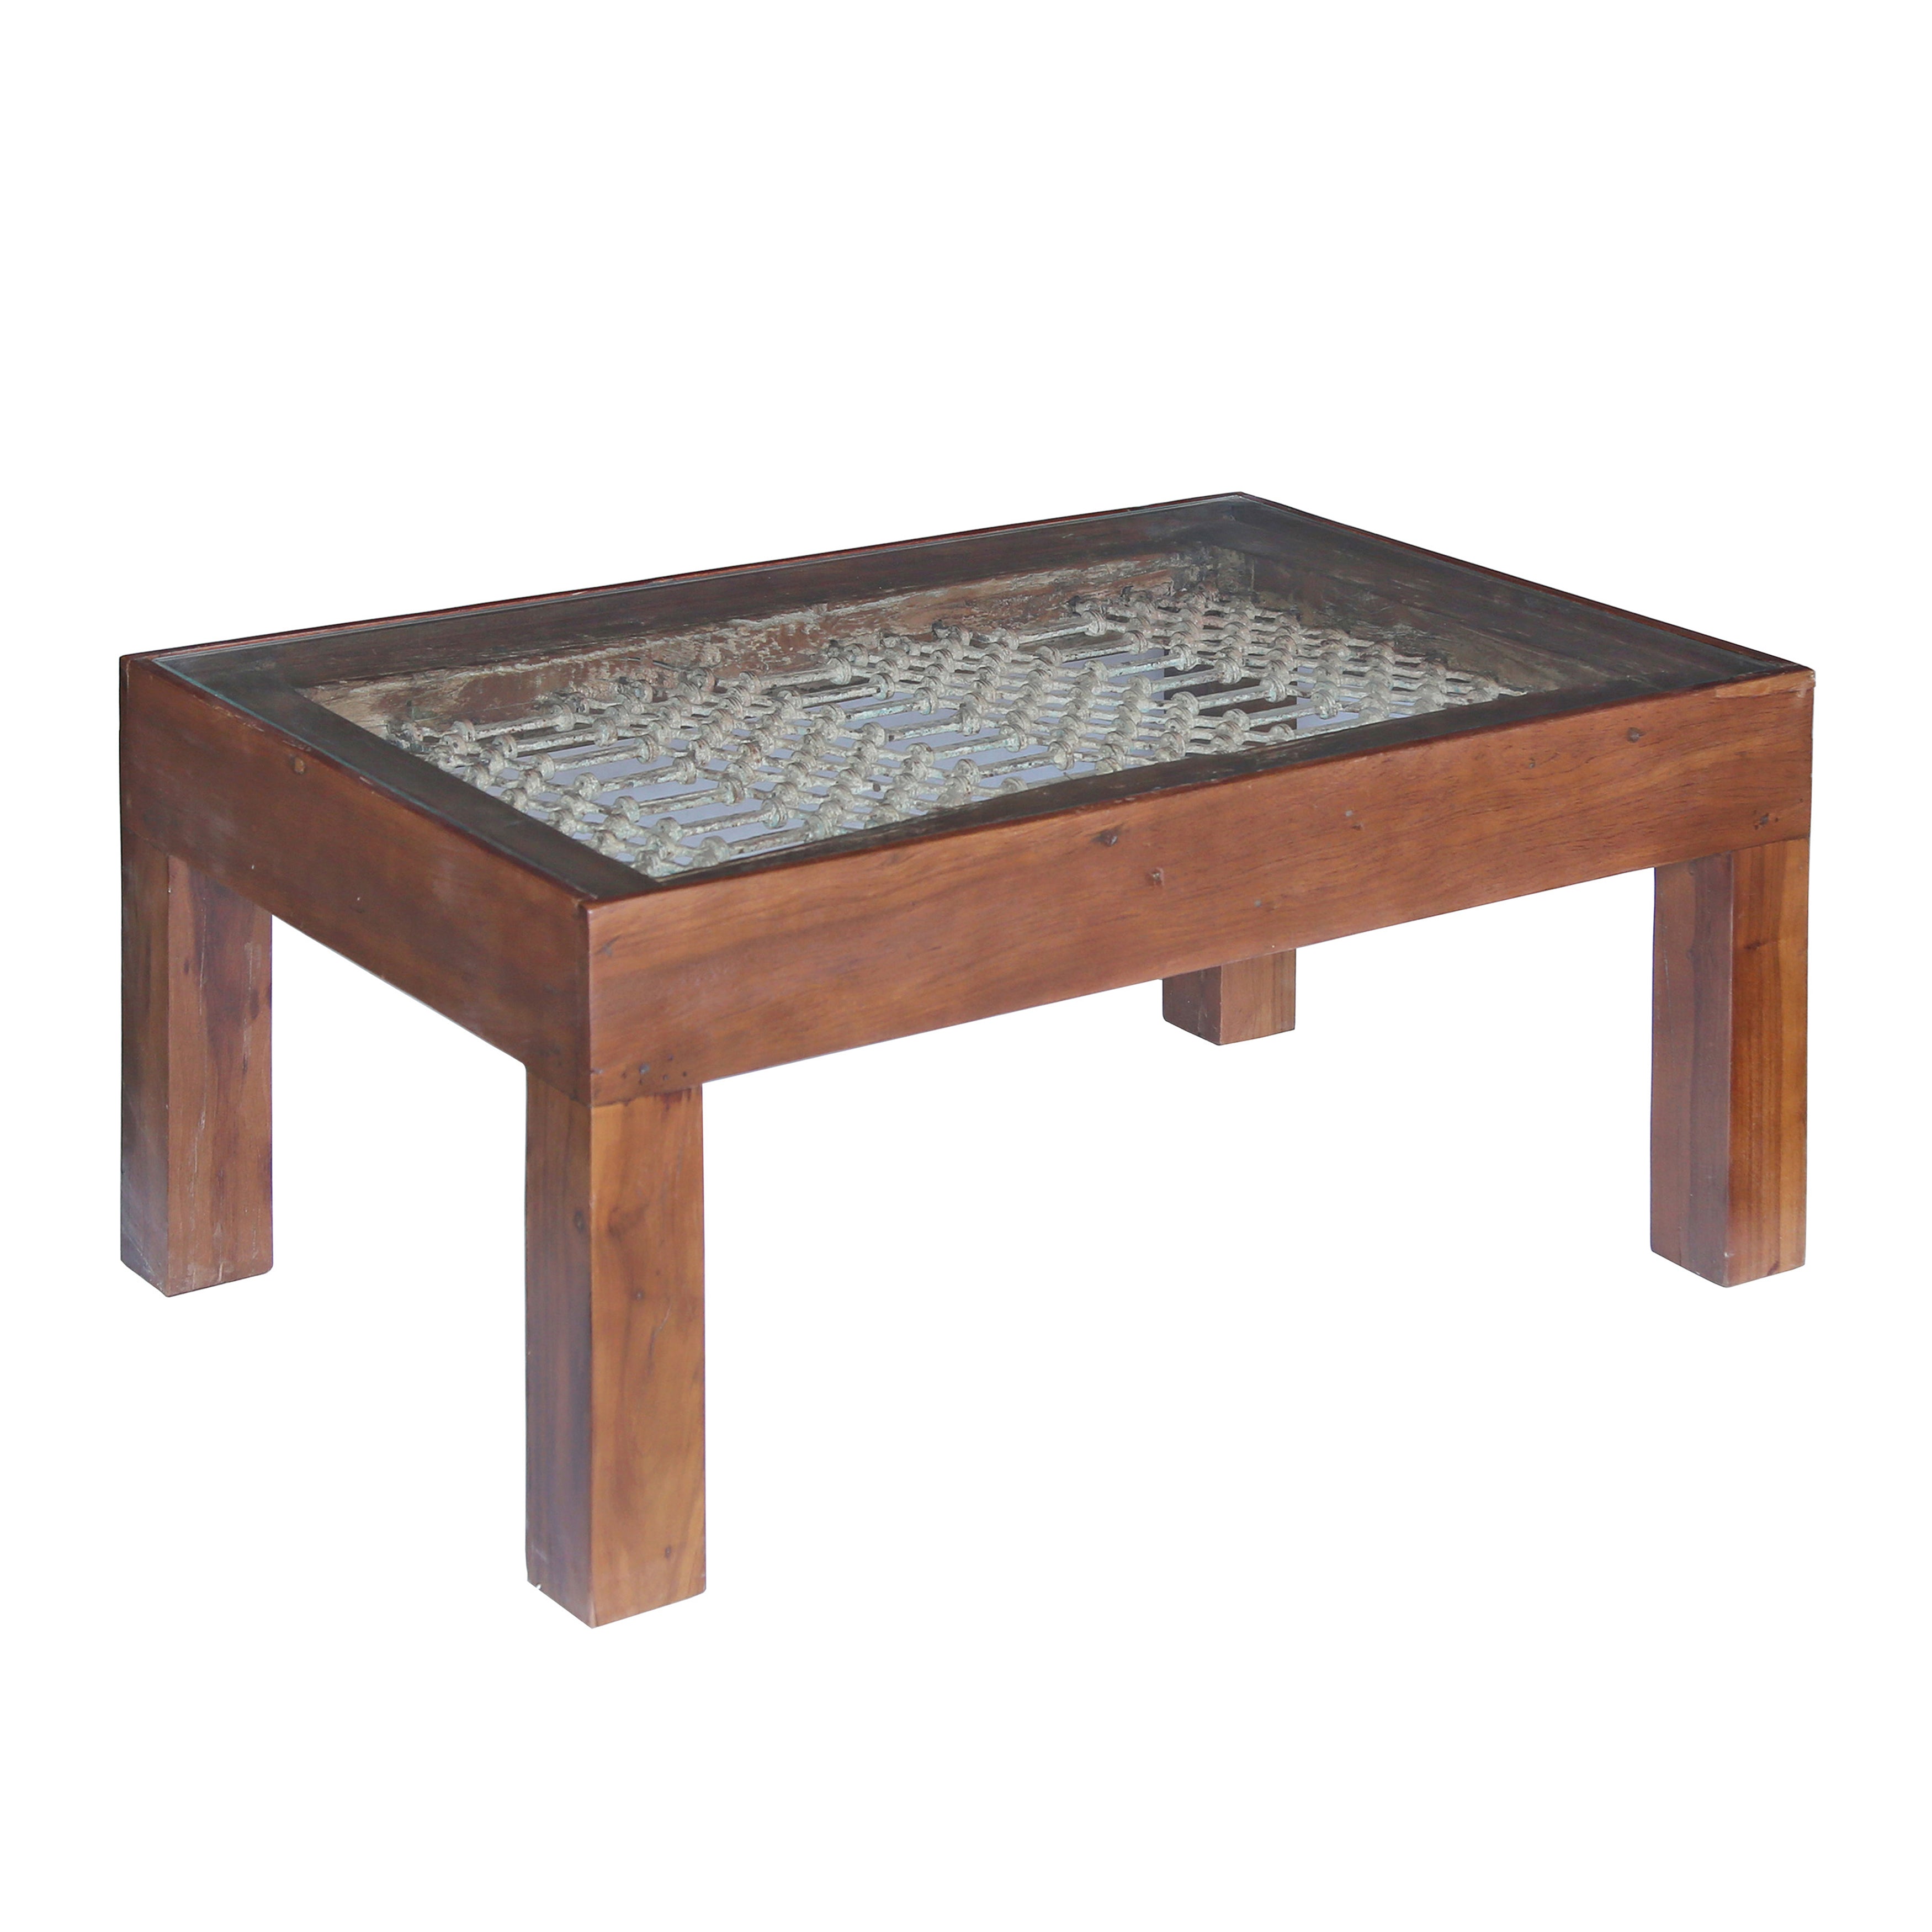 Wooden Jali Window Coffee Table - What A Room